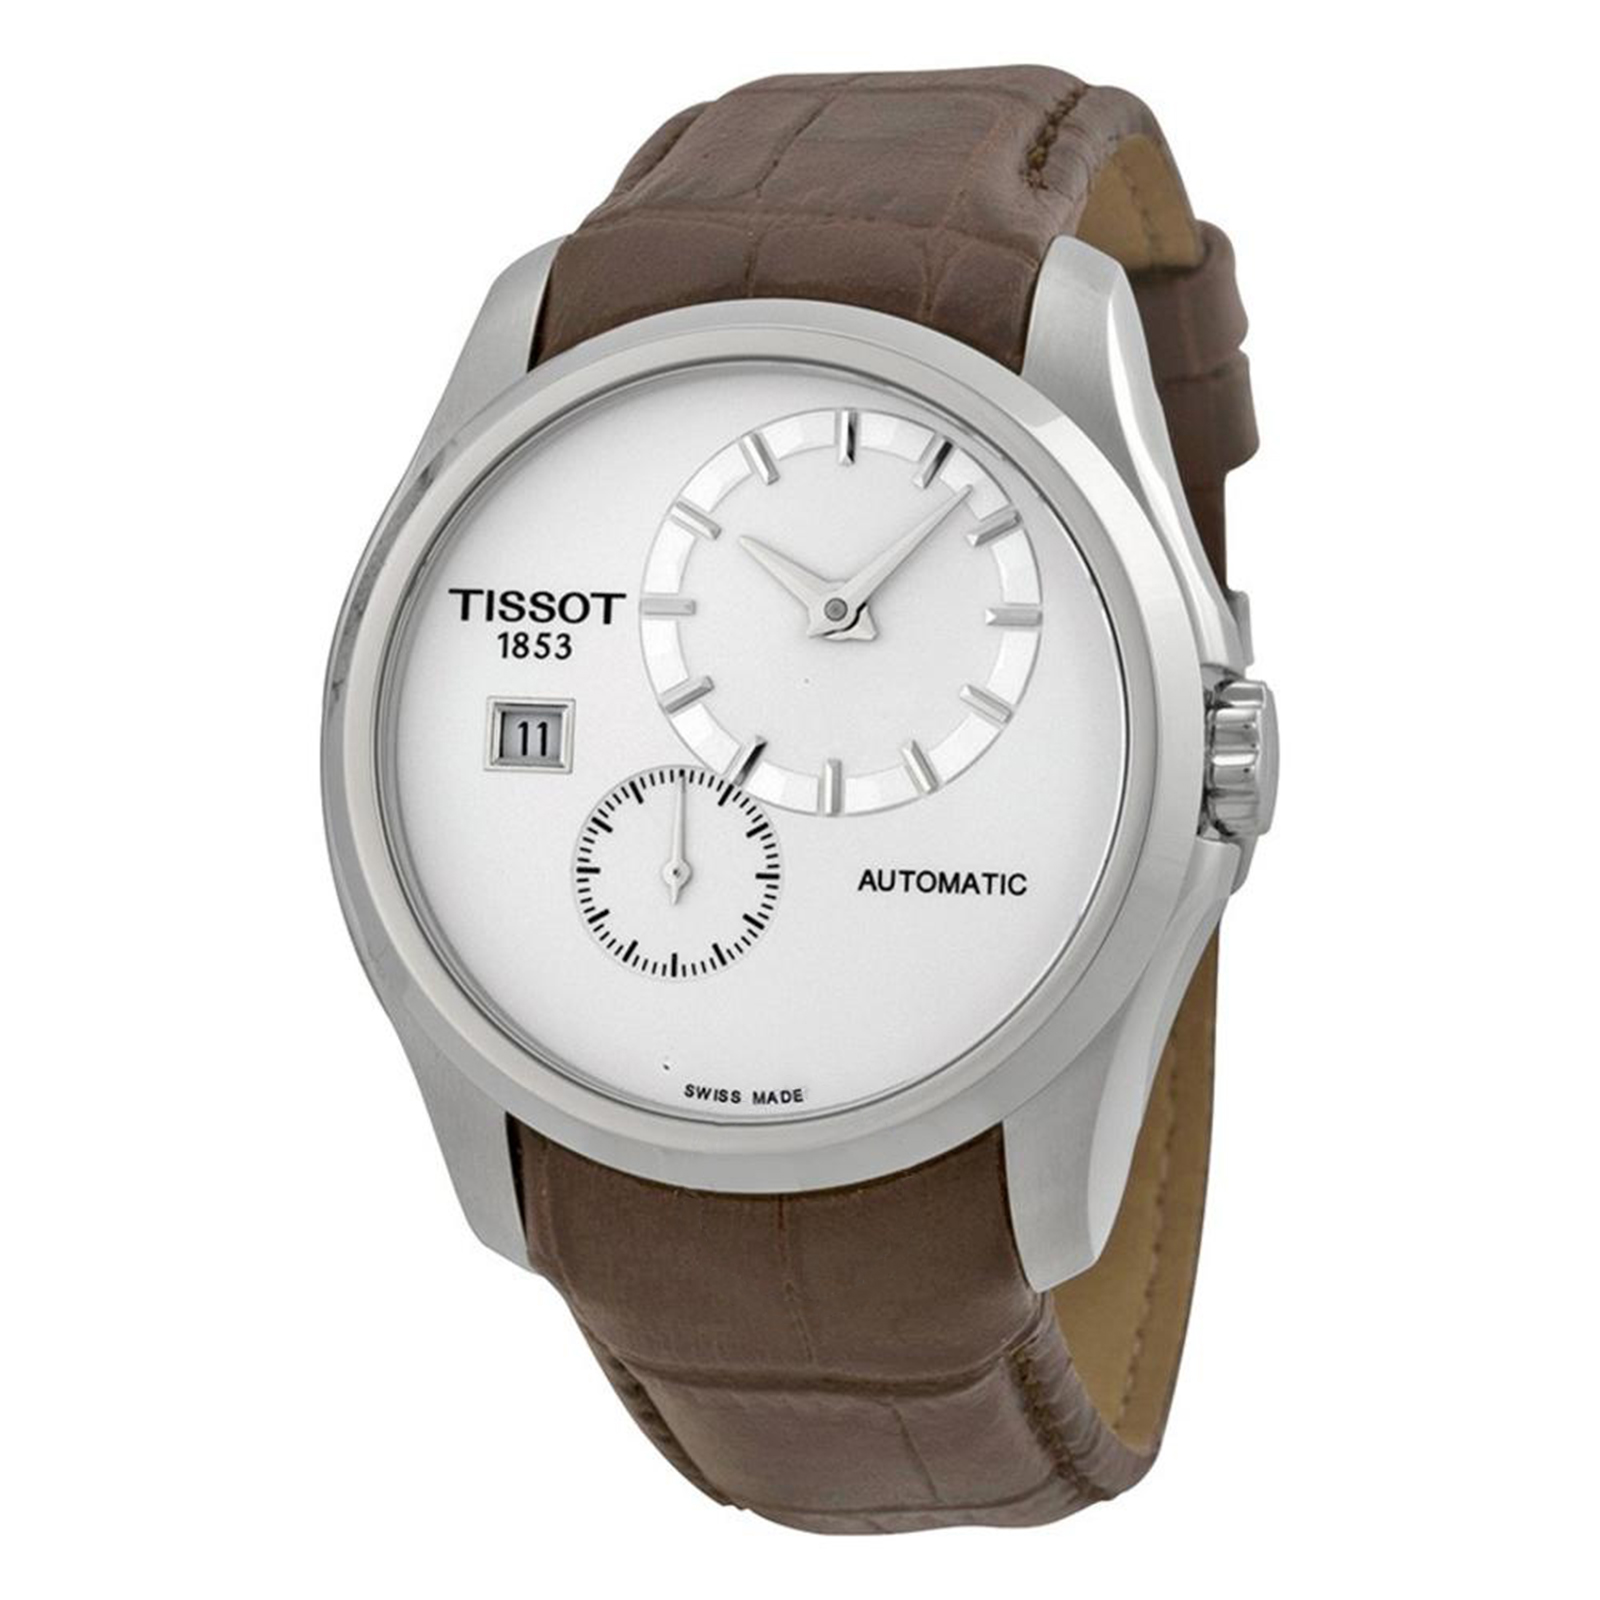 Tissot T0354281603100 Men’s Couturier Leather Watch - White